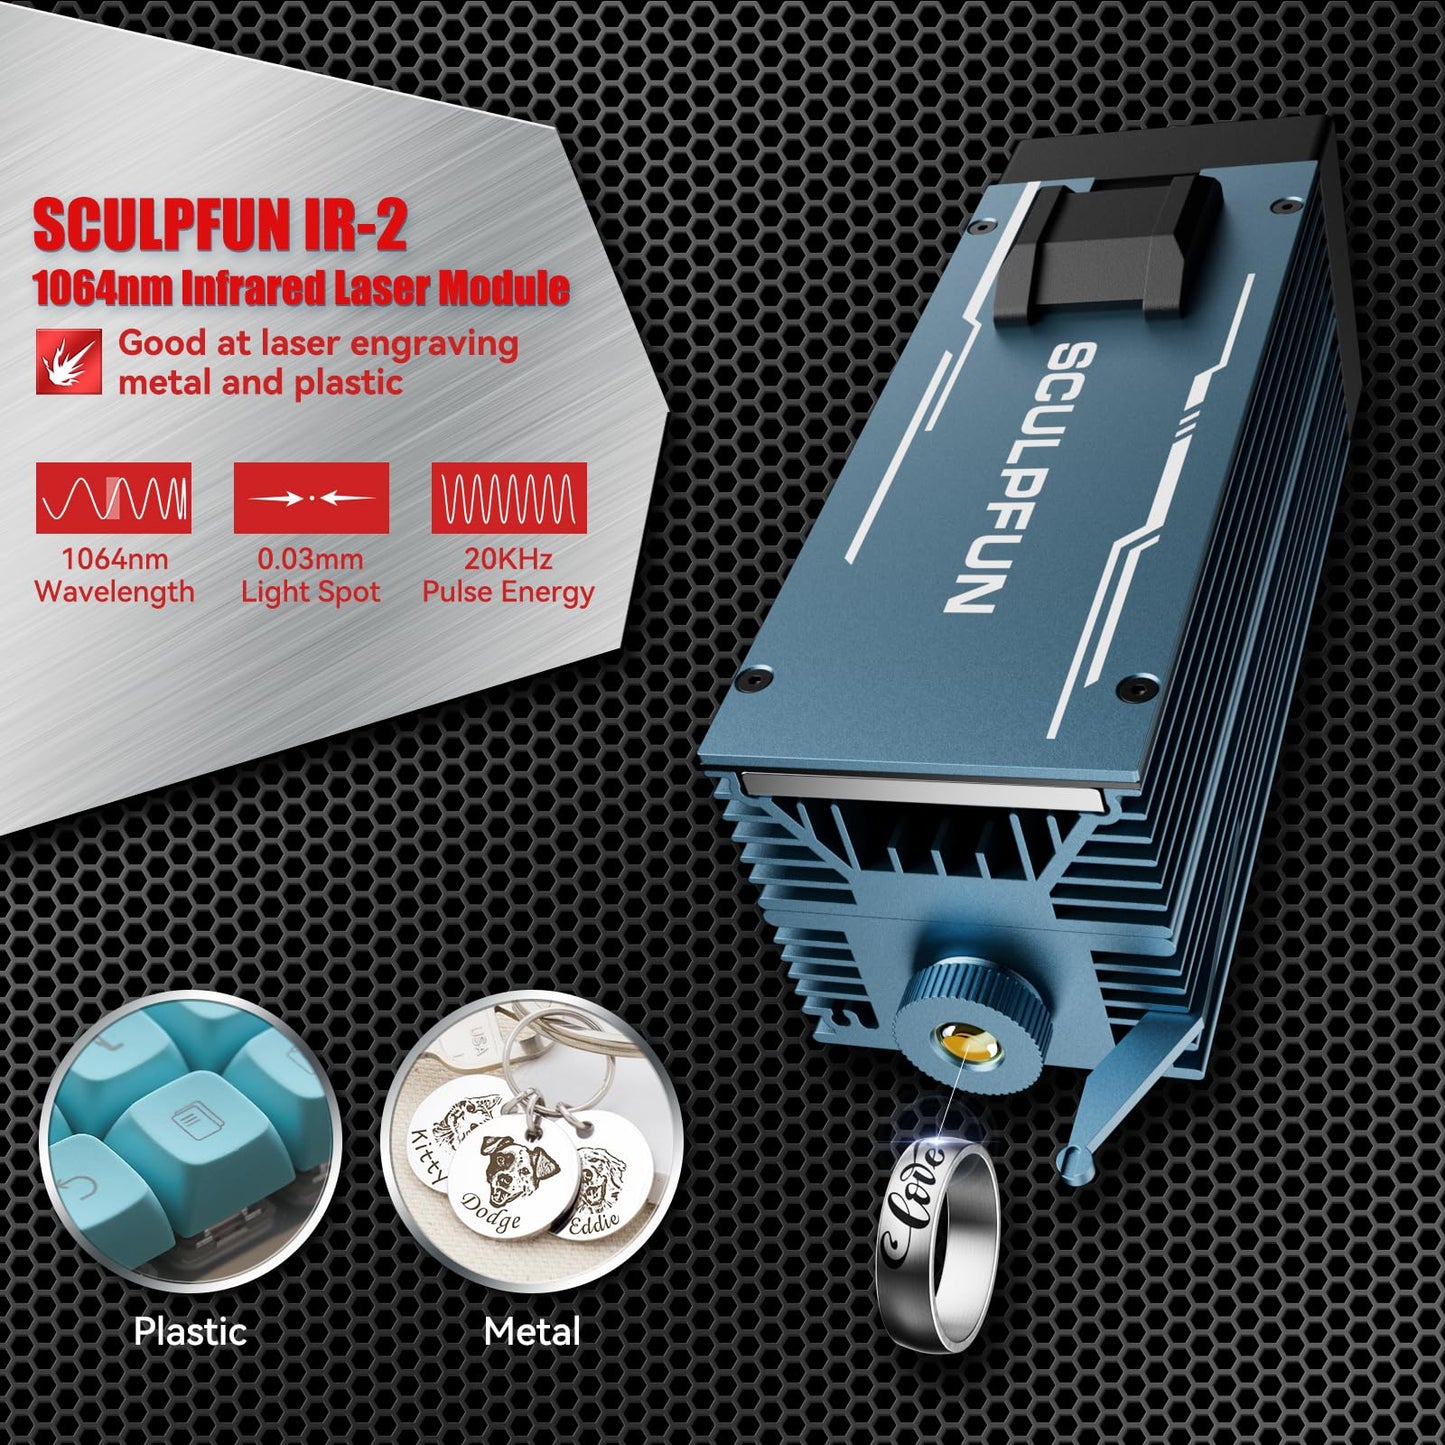 SCULPFUN IR-2 Infrared Laser Module, 2W Laser Engraver Module, 0.03 Laser Spot, High Precision Engraving, for Plastic and Various Metals, for Laser